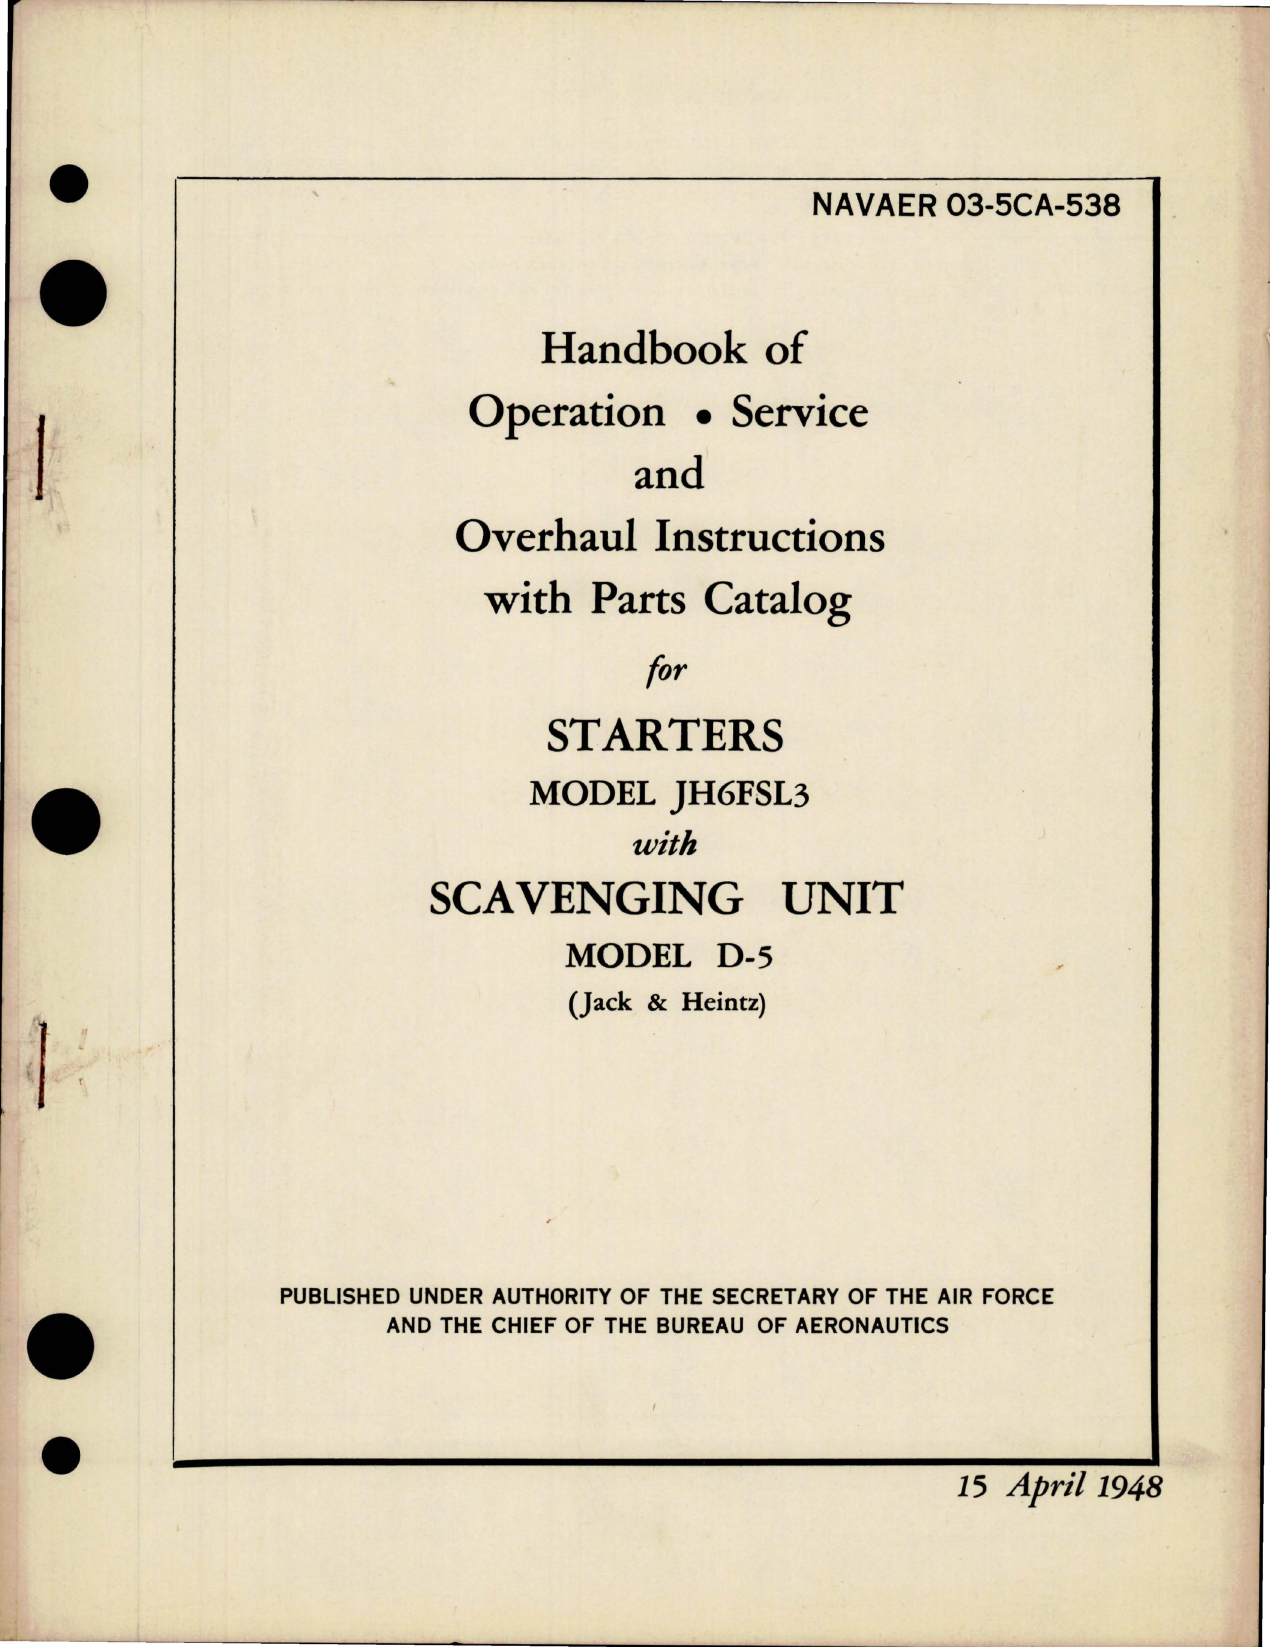 Sample page 1 from AirCorps Library document: Operation, Service, Overhaul Instructions with Parts for Starters - Model JH6FSL3 - with Scavenging Unit - Model D-5